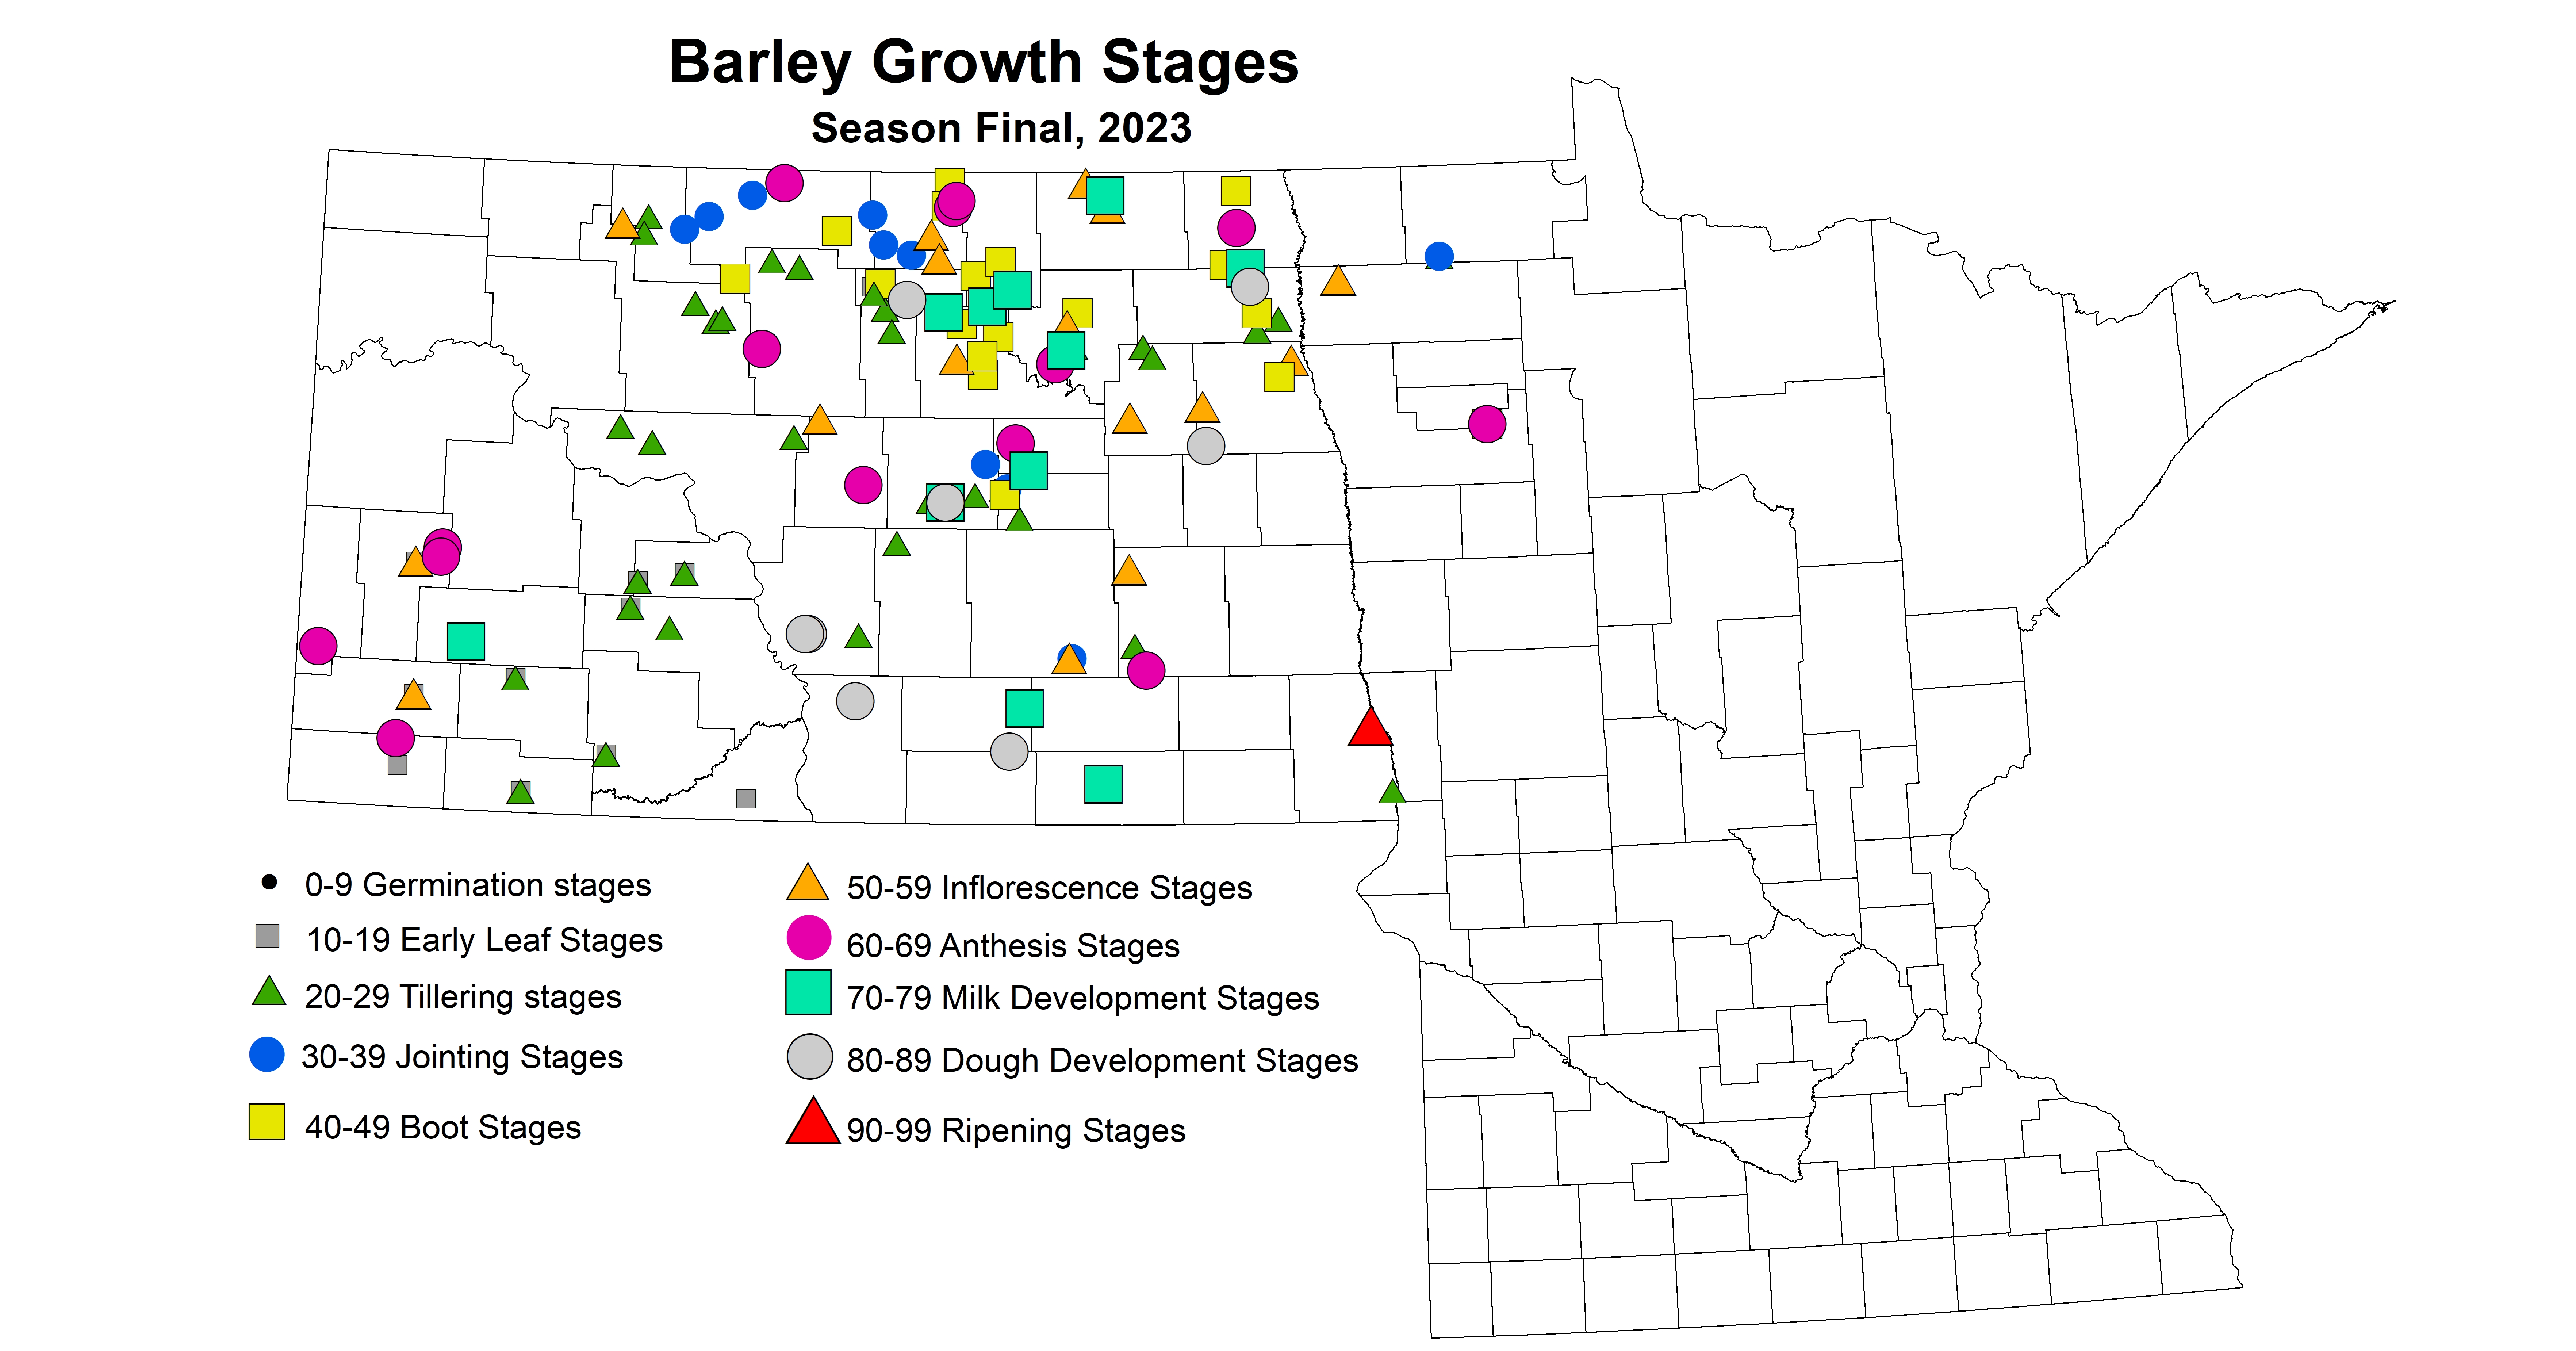 barley growth stages season final 2023